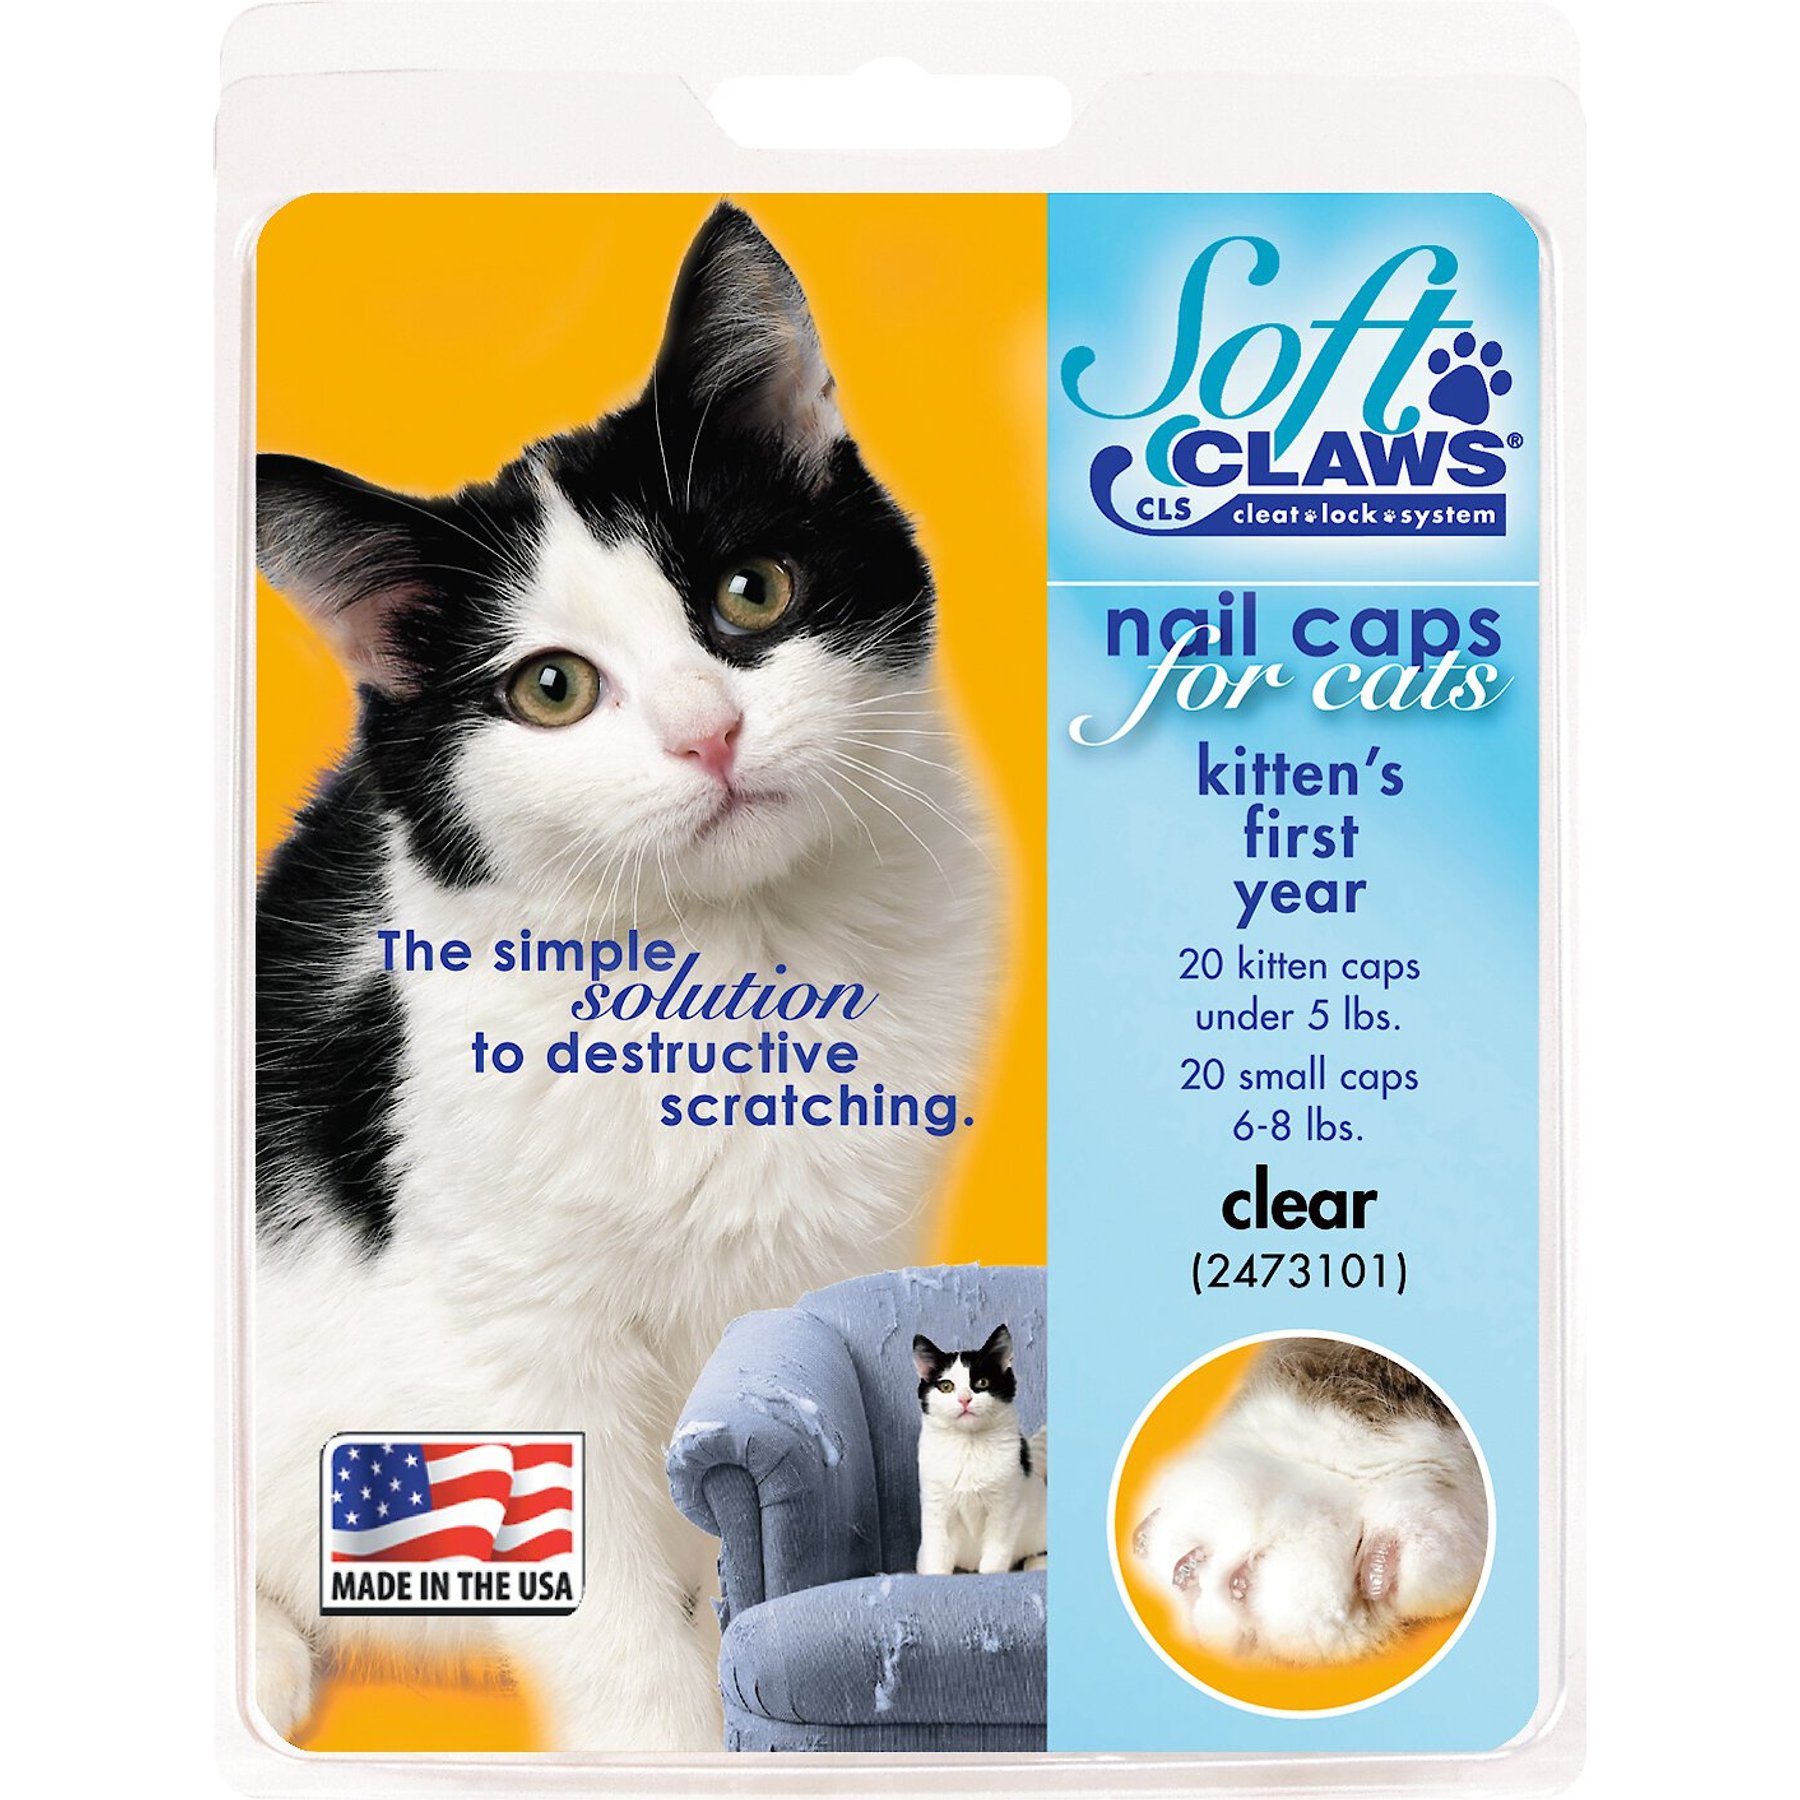 Cat Claw Caps and Covers: All You Need to Know - We Love Cats and Kittens